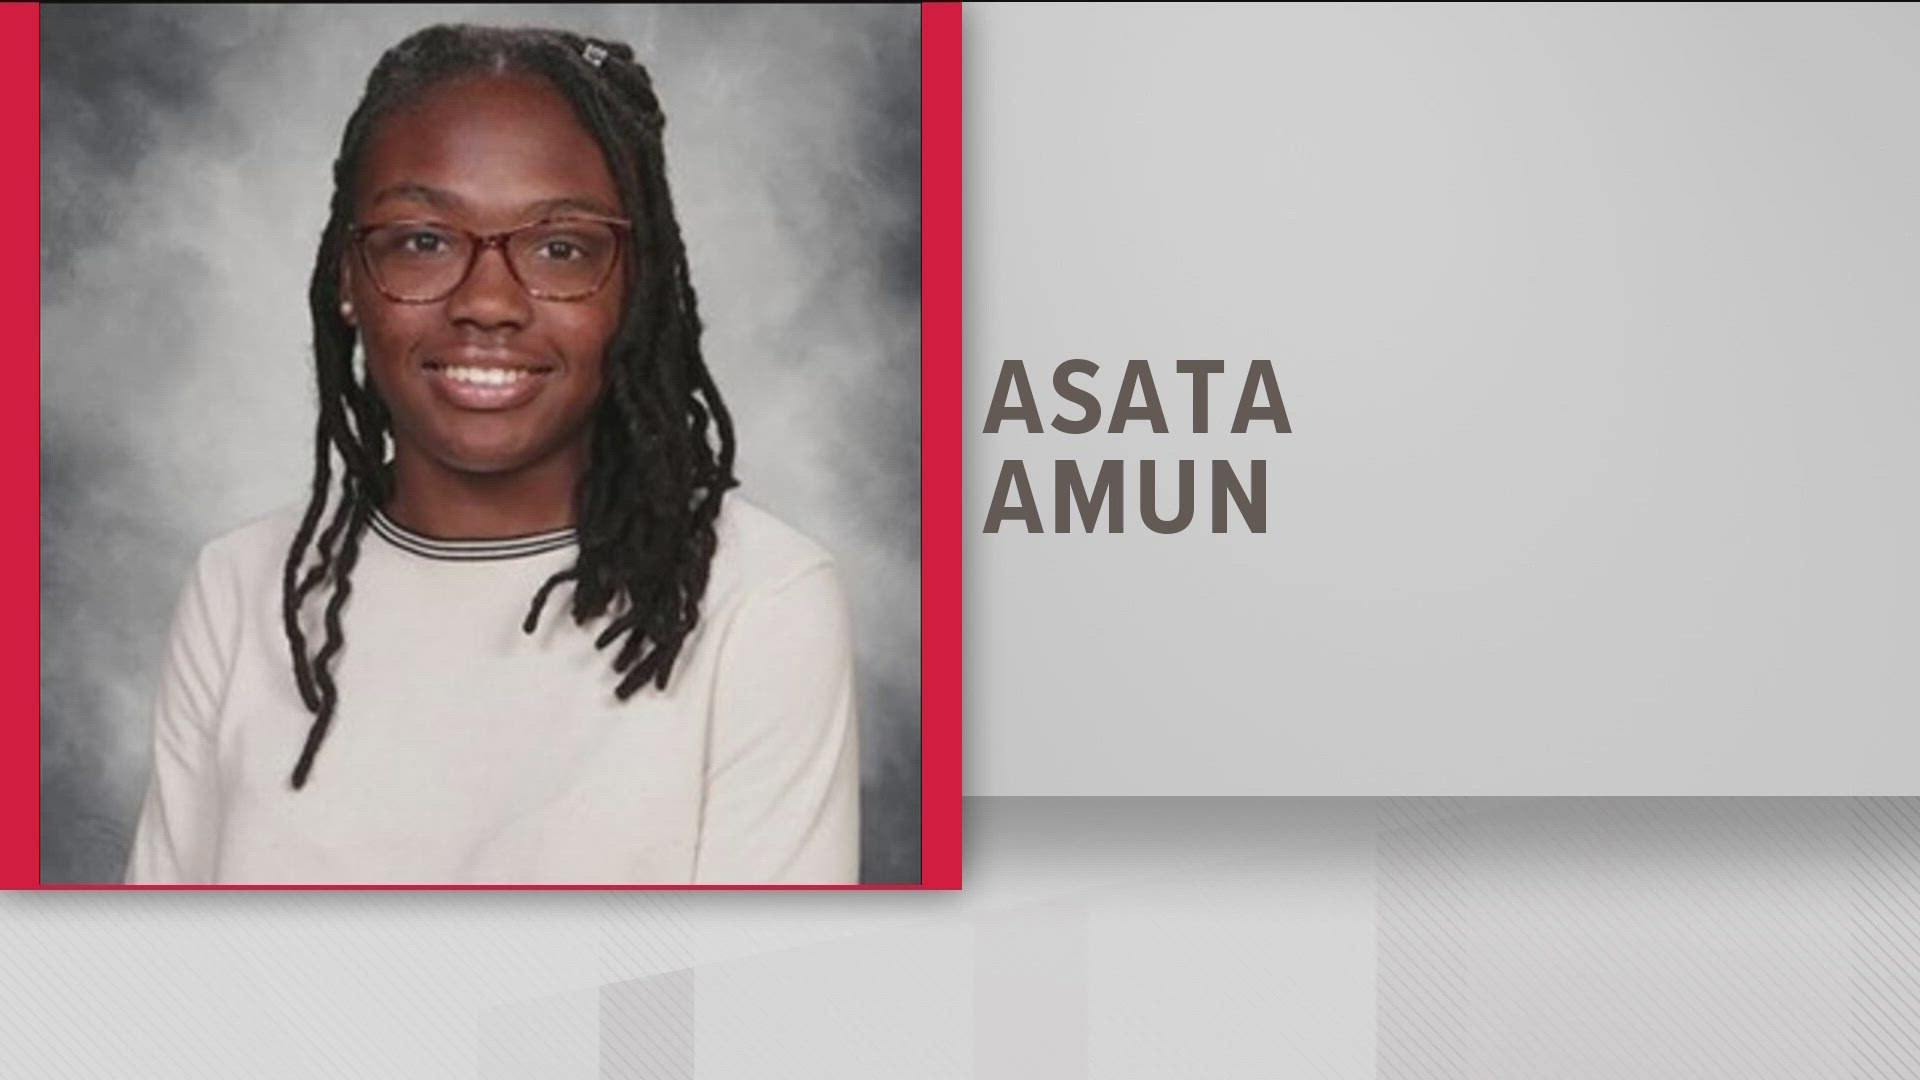 Asata Amun, 16, was last seen leaving her home in Buford on Feb. 1.